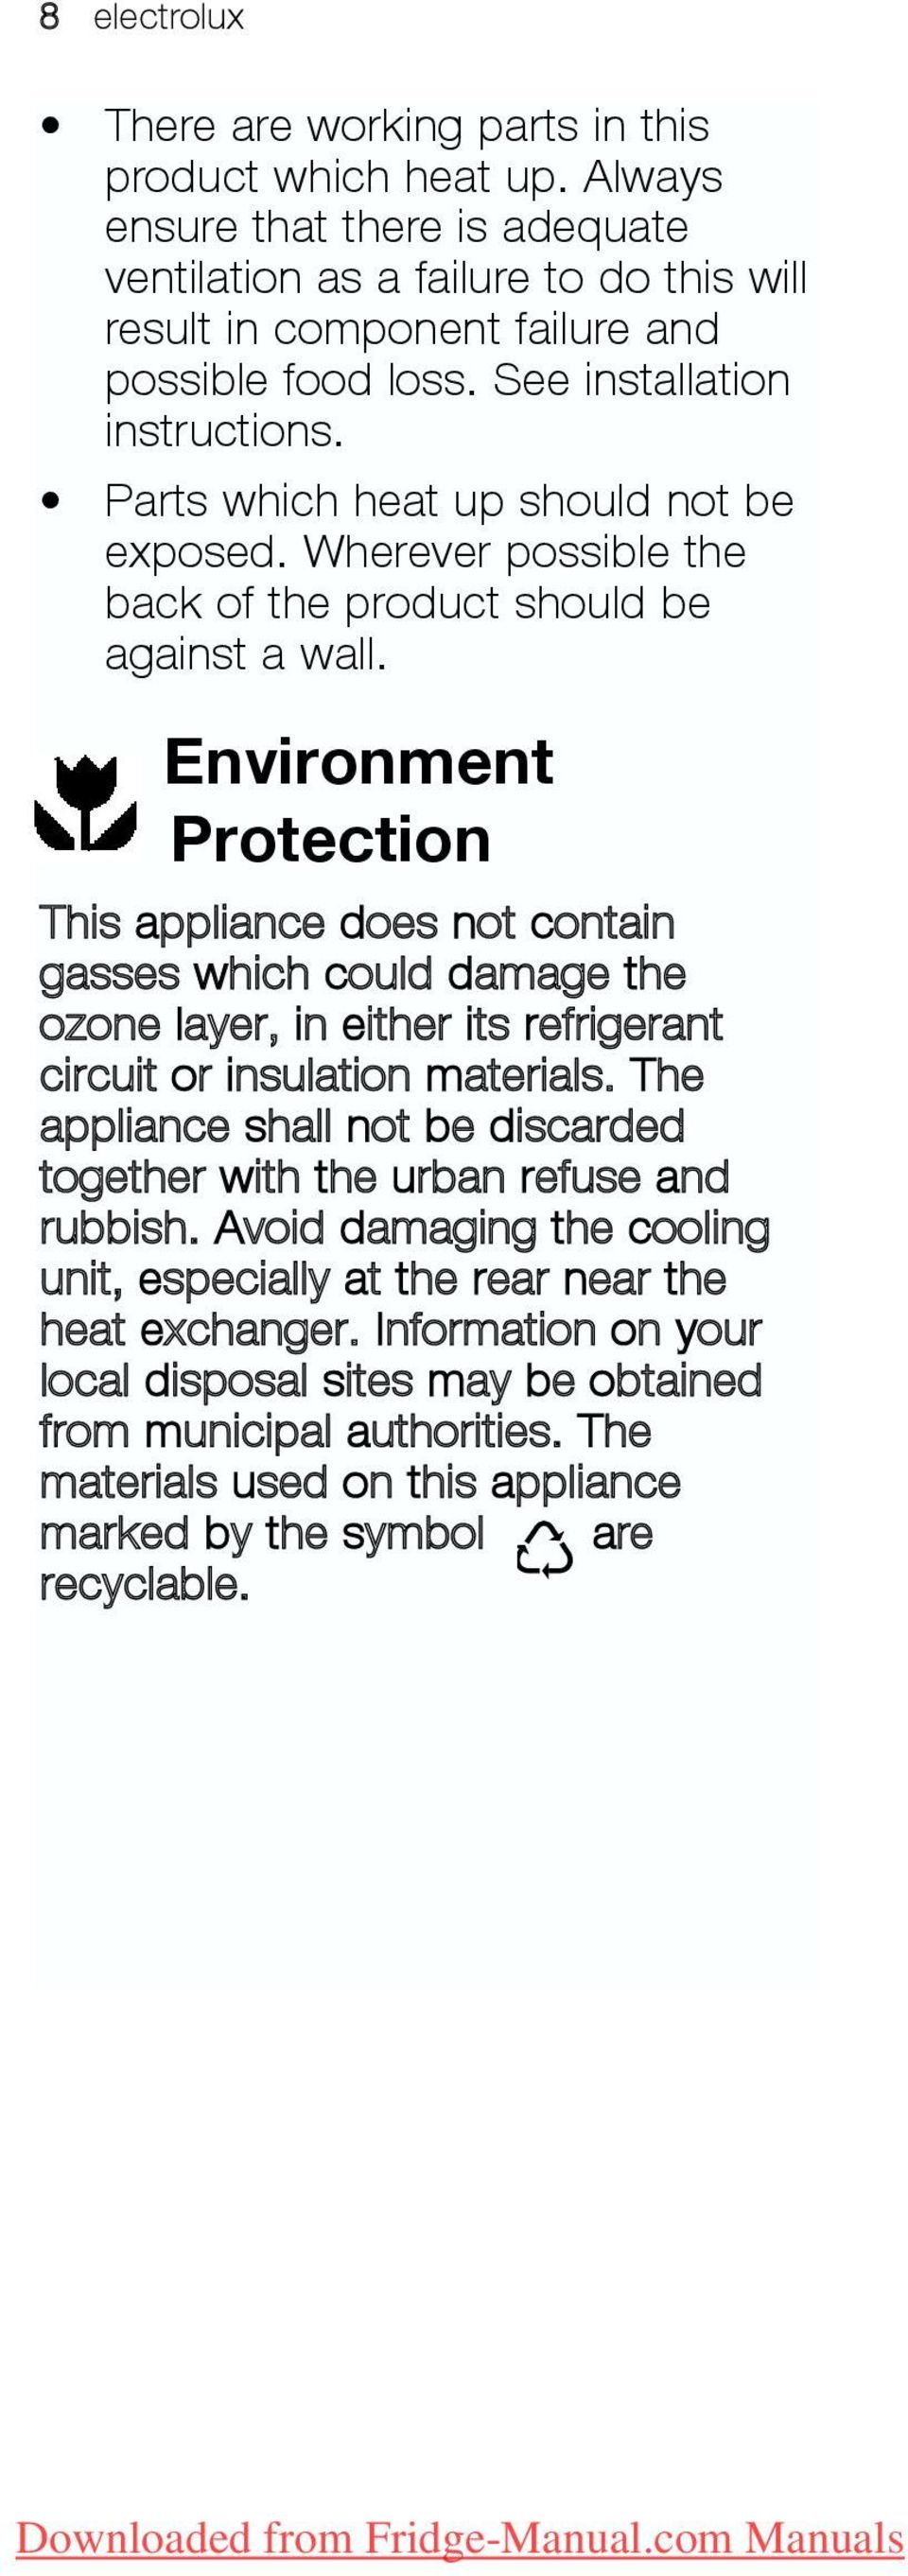 Environment Protection This appliance does not contain gasses which could damage the ozone layer, in either its refrigerant circuit or insulation materials.